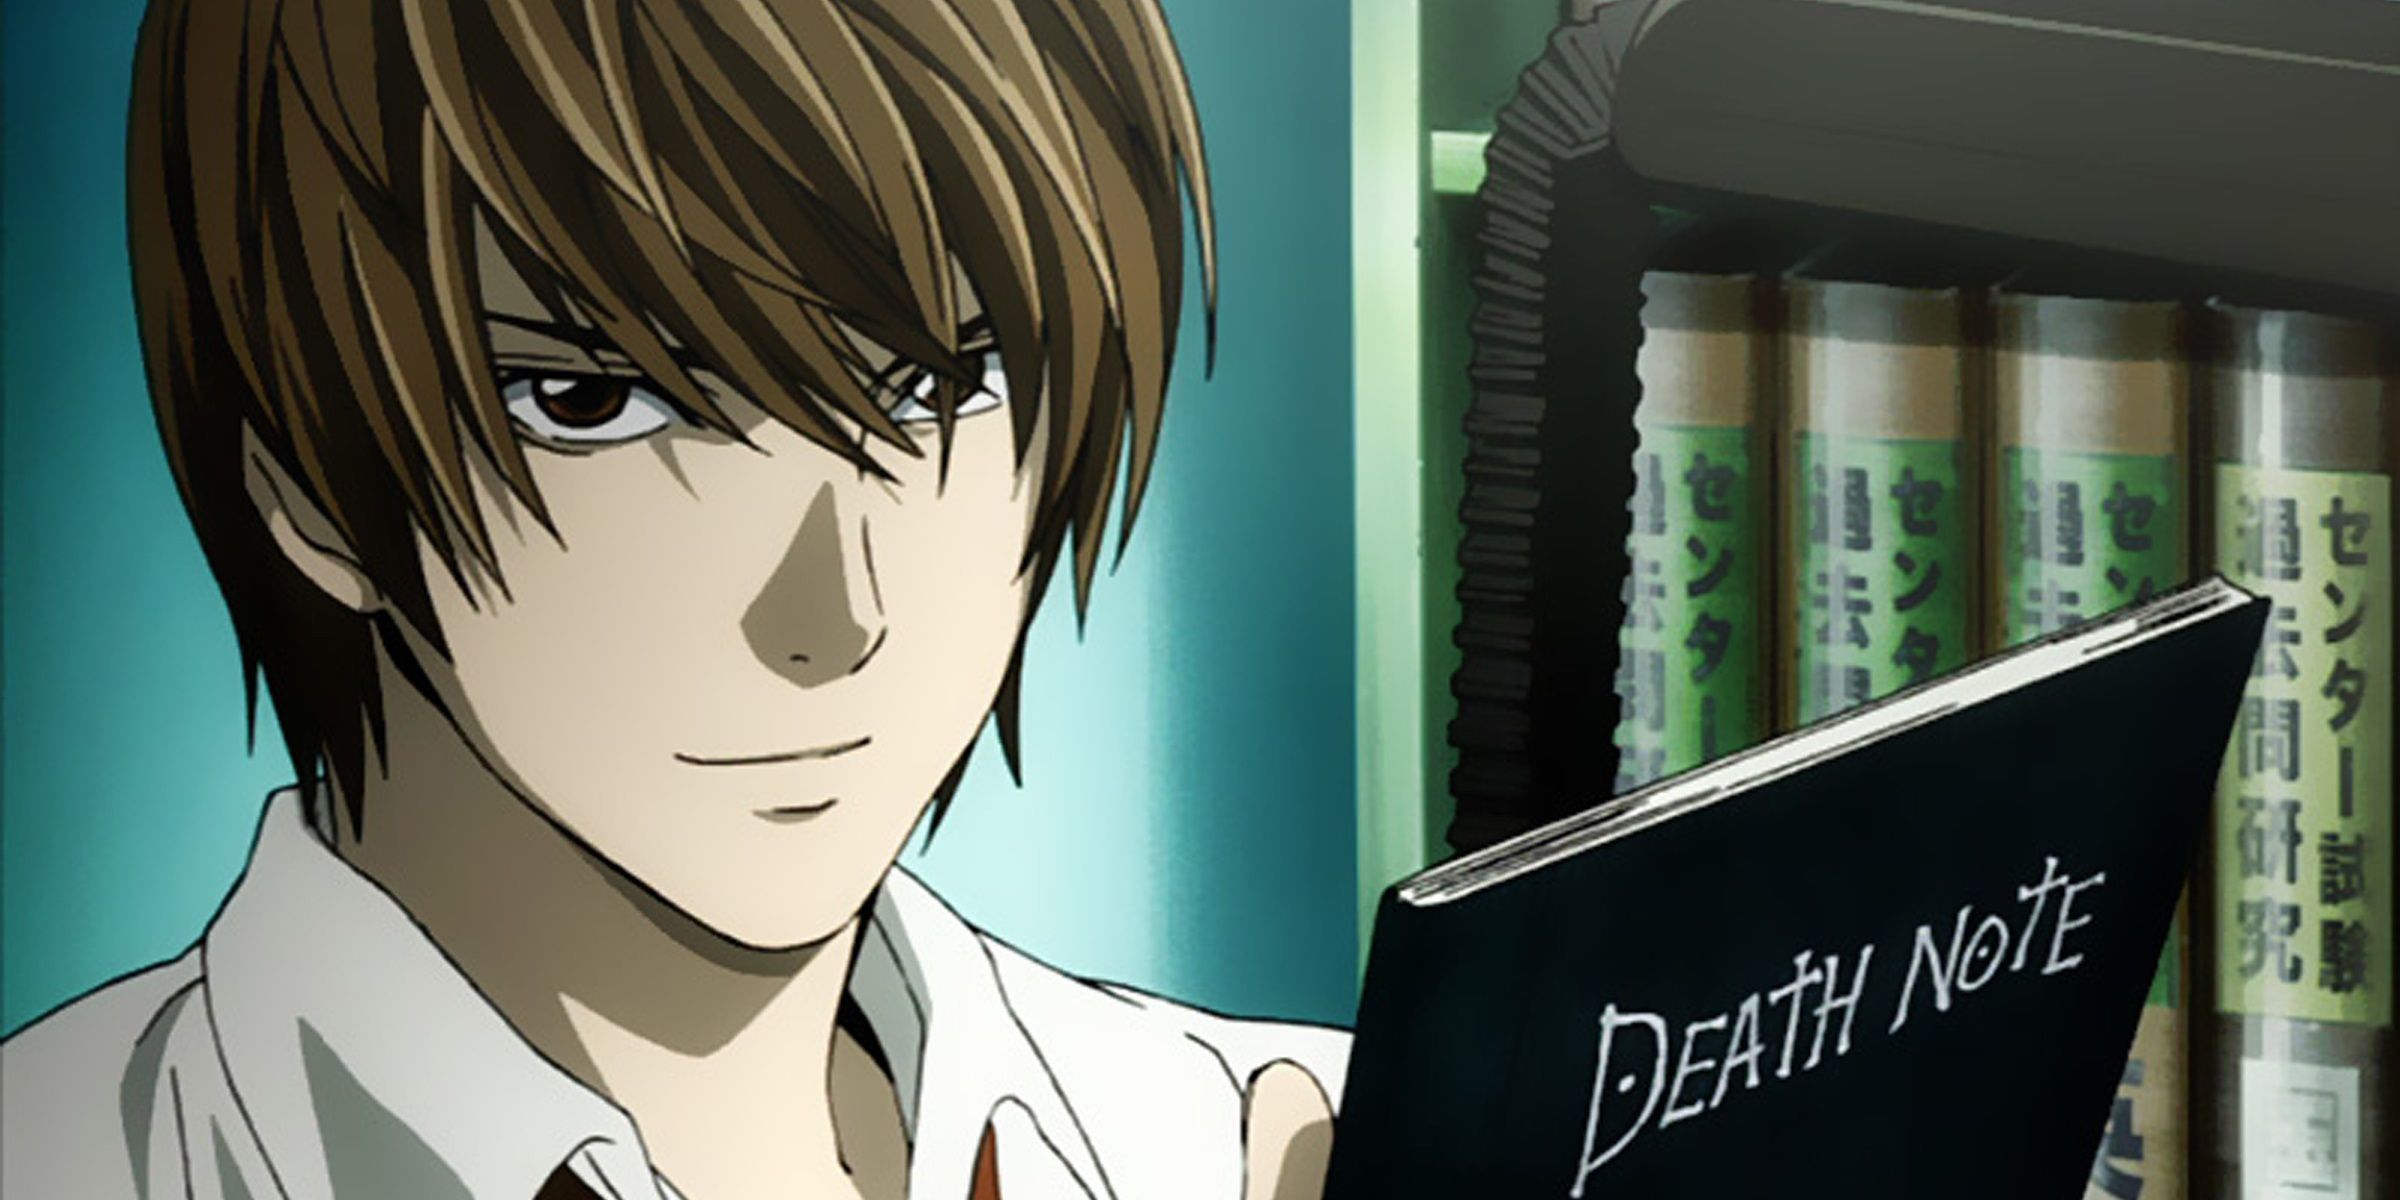 Light Yagami smirks as he holds his patented Death note